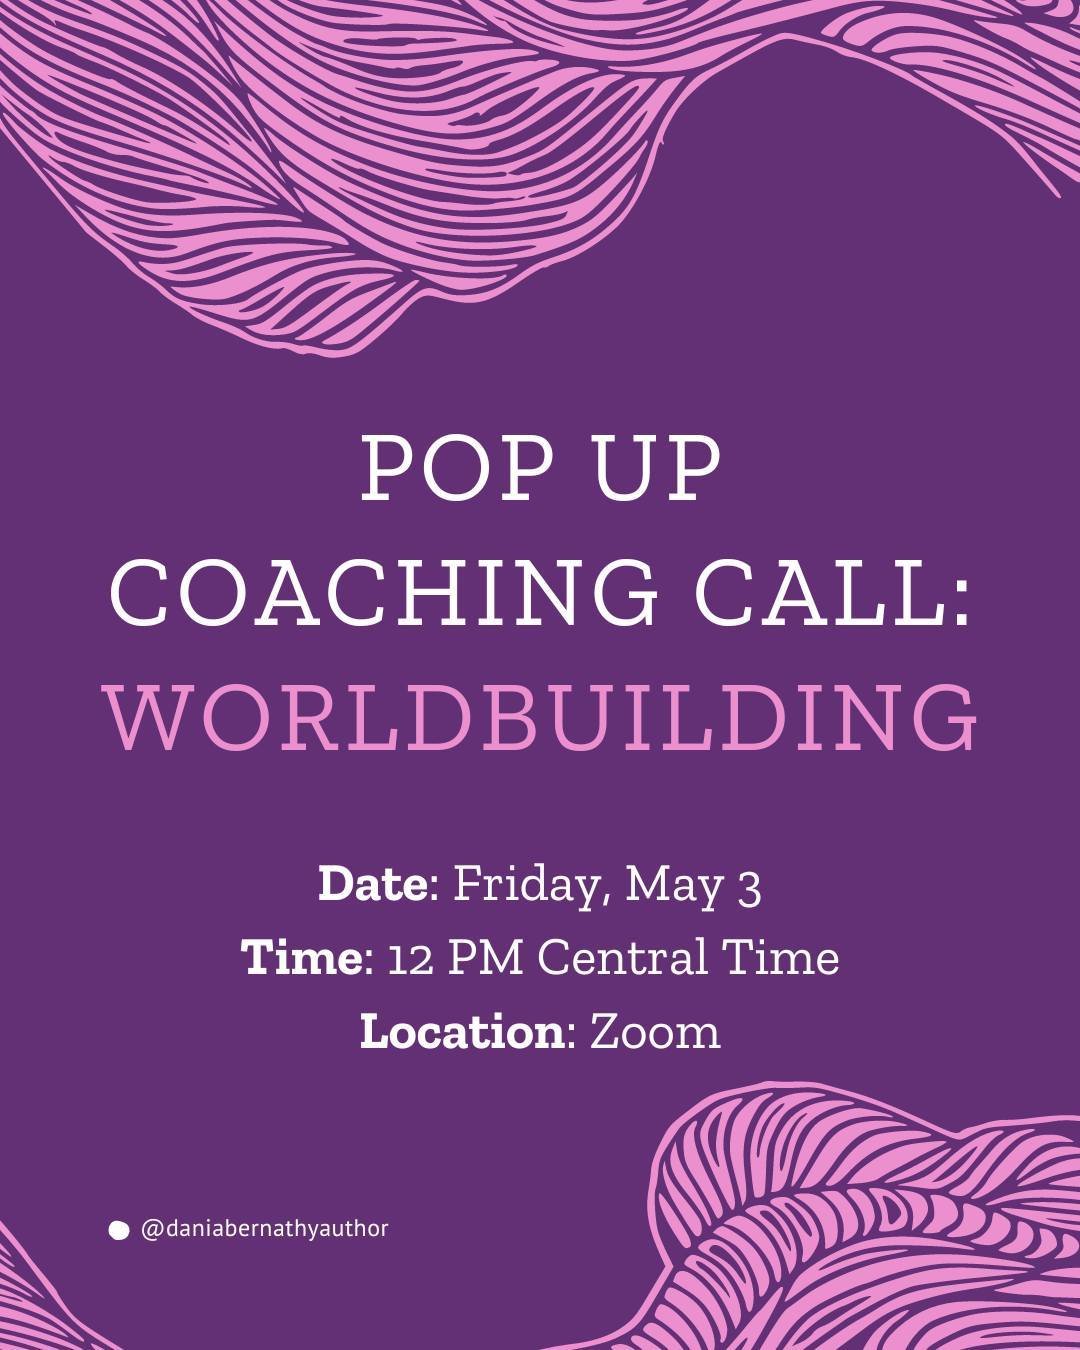 Ever wanted to ask me a question about your book? Well, you're in luck.⁠
⁠
I'm oh-so excited to host my first-ever Pop Up Coaching Call on Friday, May 3 at noon Central Time.⁠
⁠
My favorite thing to do is help writers go deep in their stories and fin